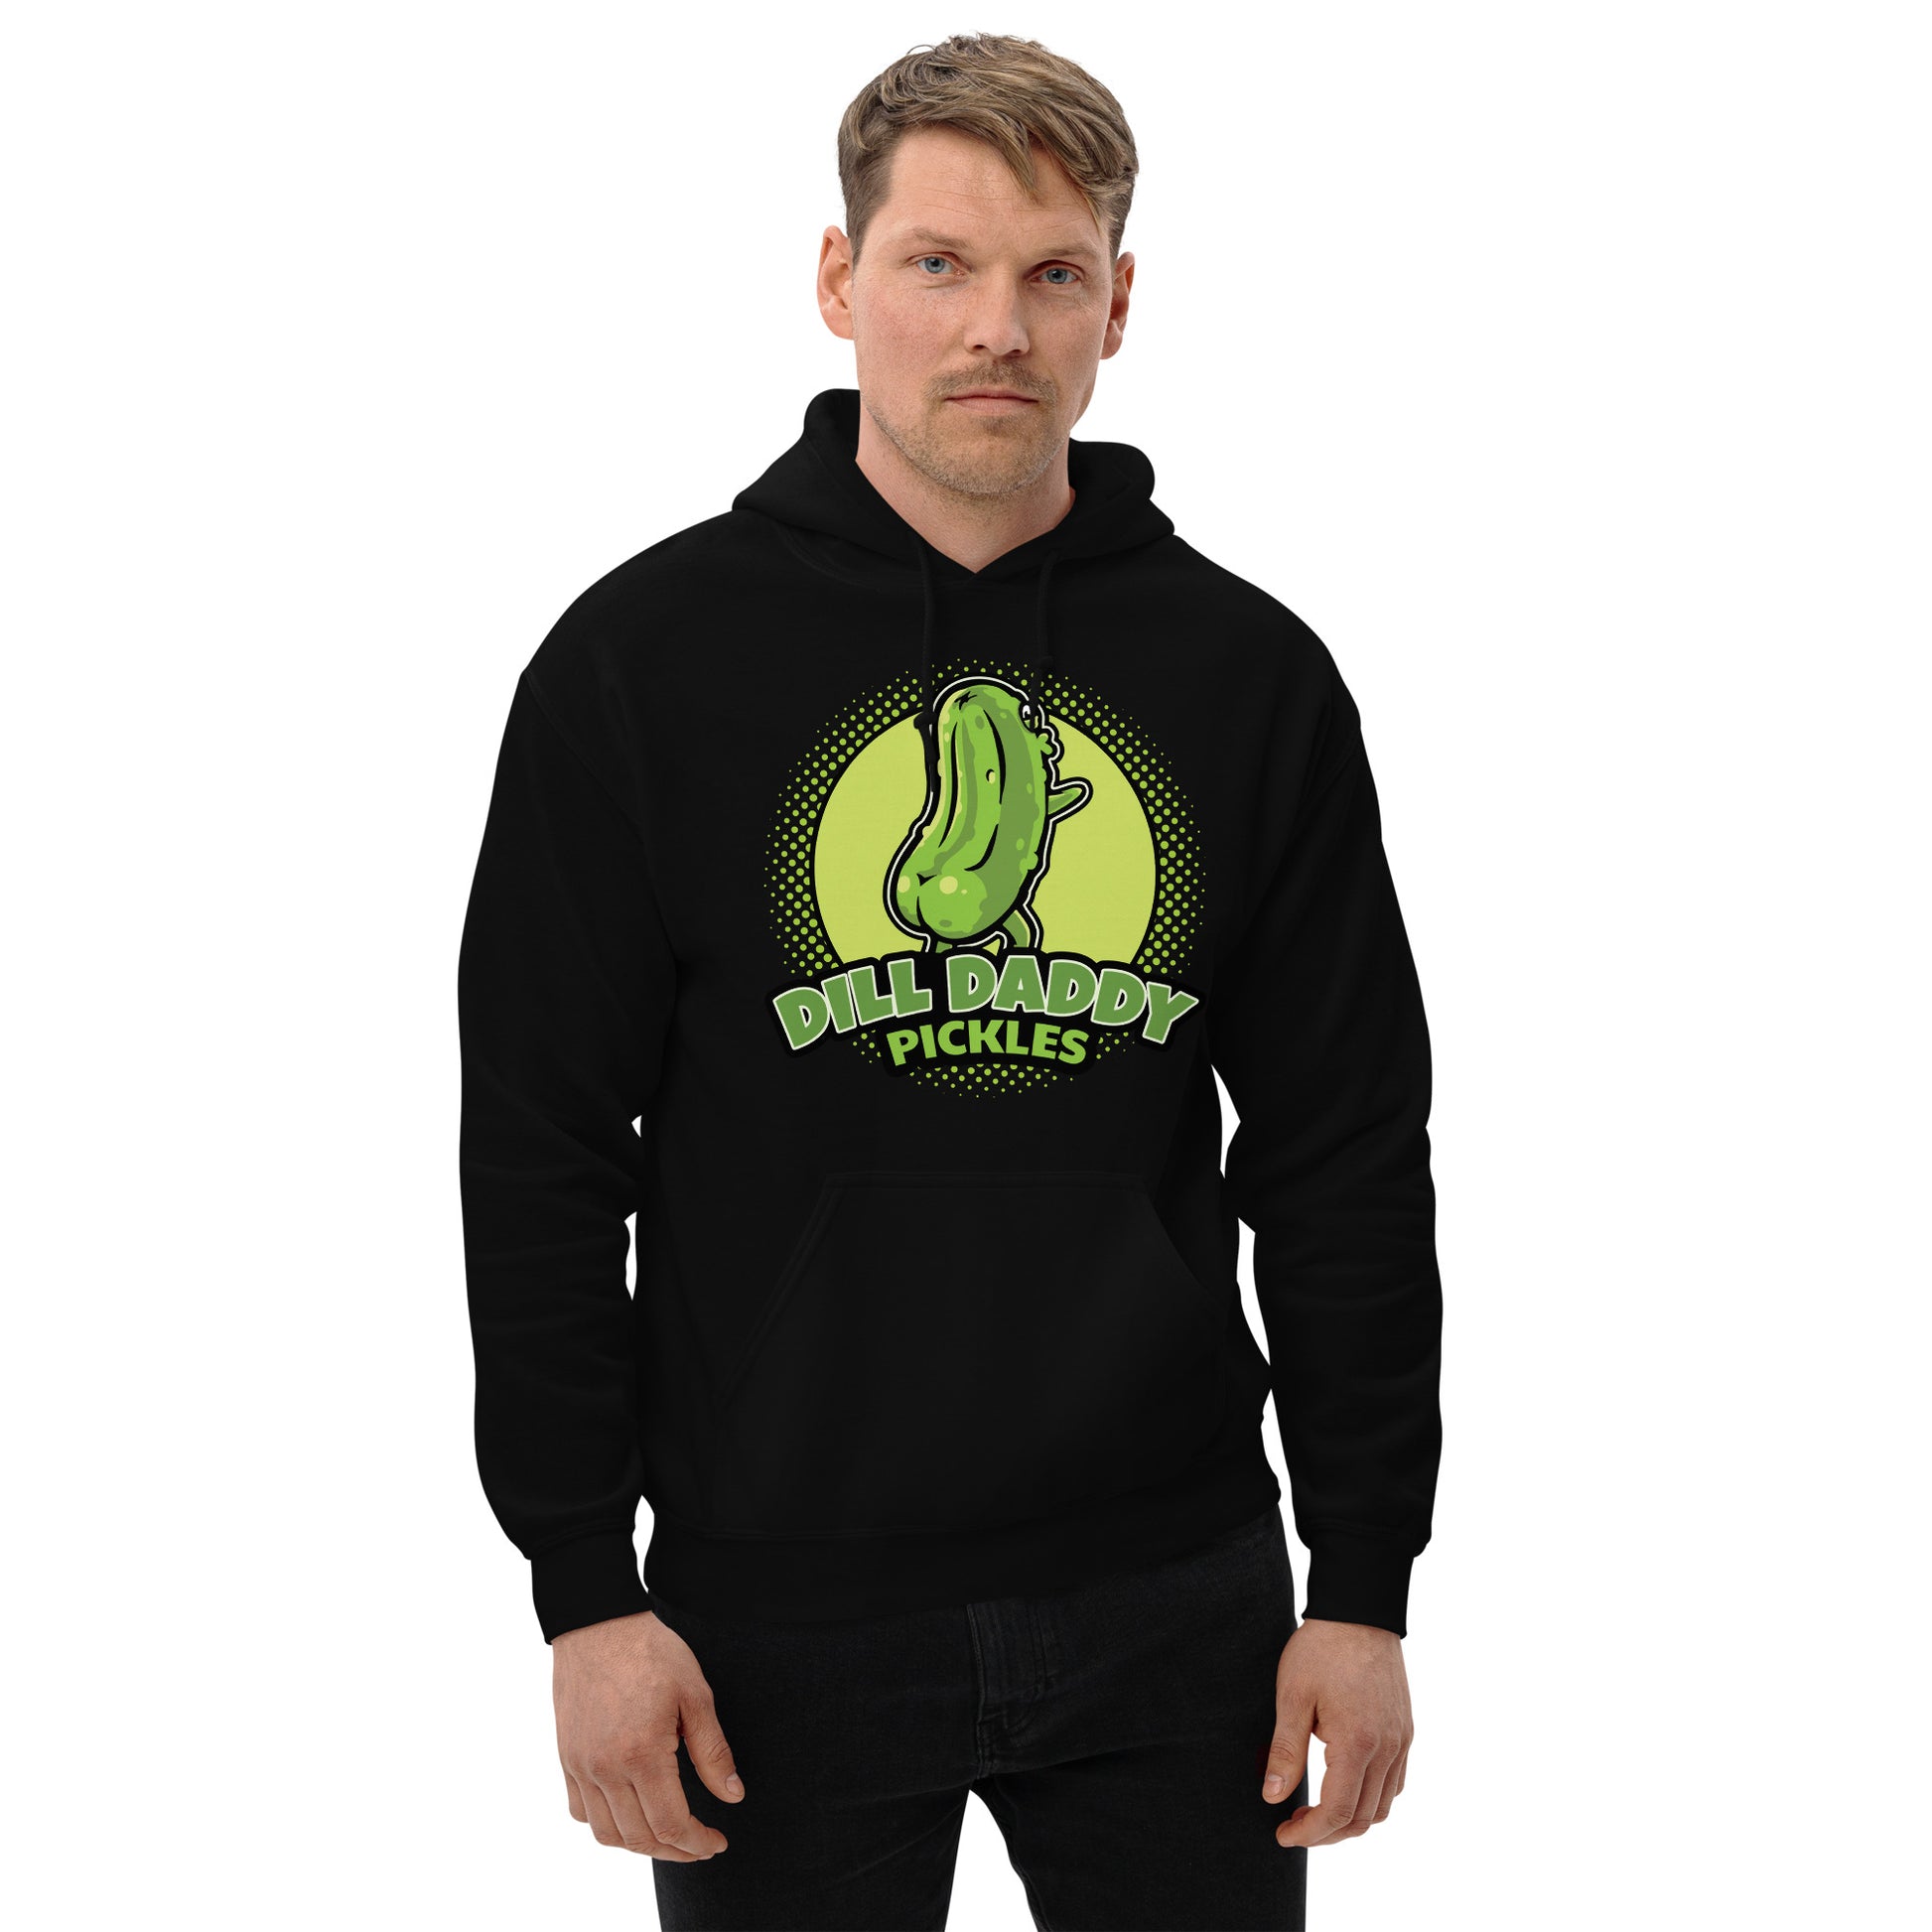 Pickle Guys Hoodie Sweatshirt Black – Shipping Included – The Pickle Guys